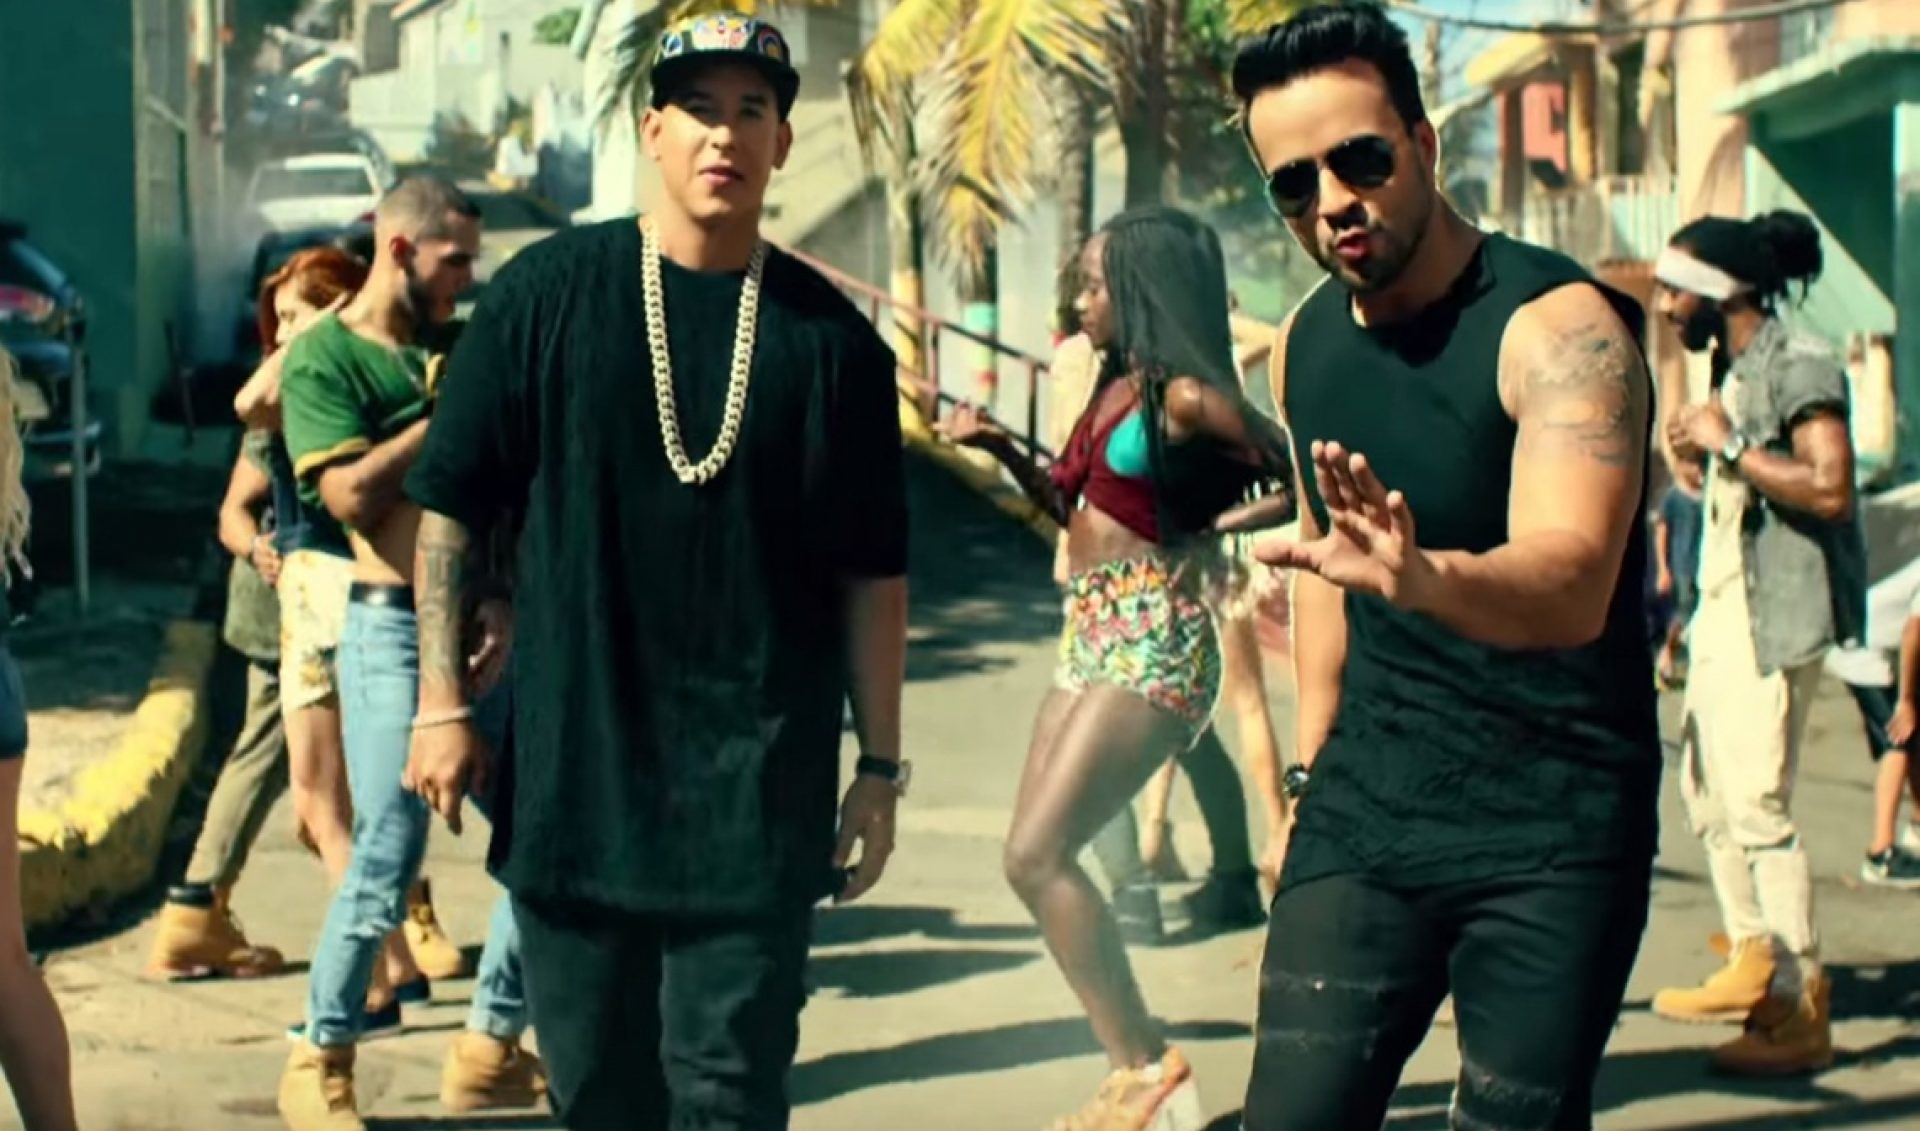 Luis Fonsi And Daddy Yankee’s “Despacito” Is The First YouTube Video To Receive Five Billion Views